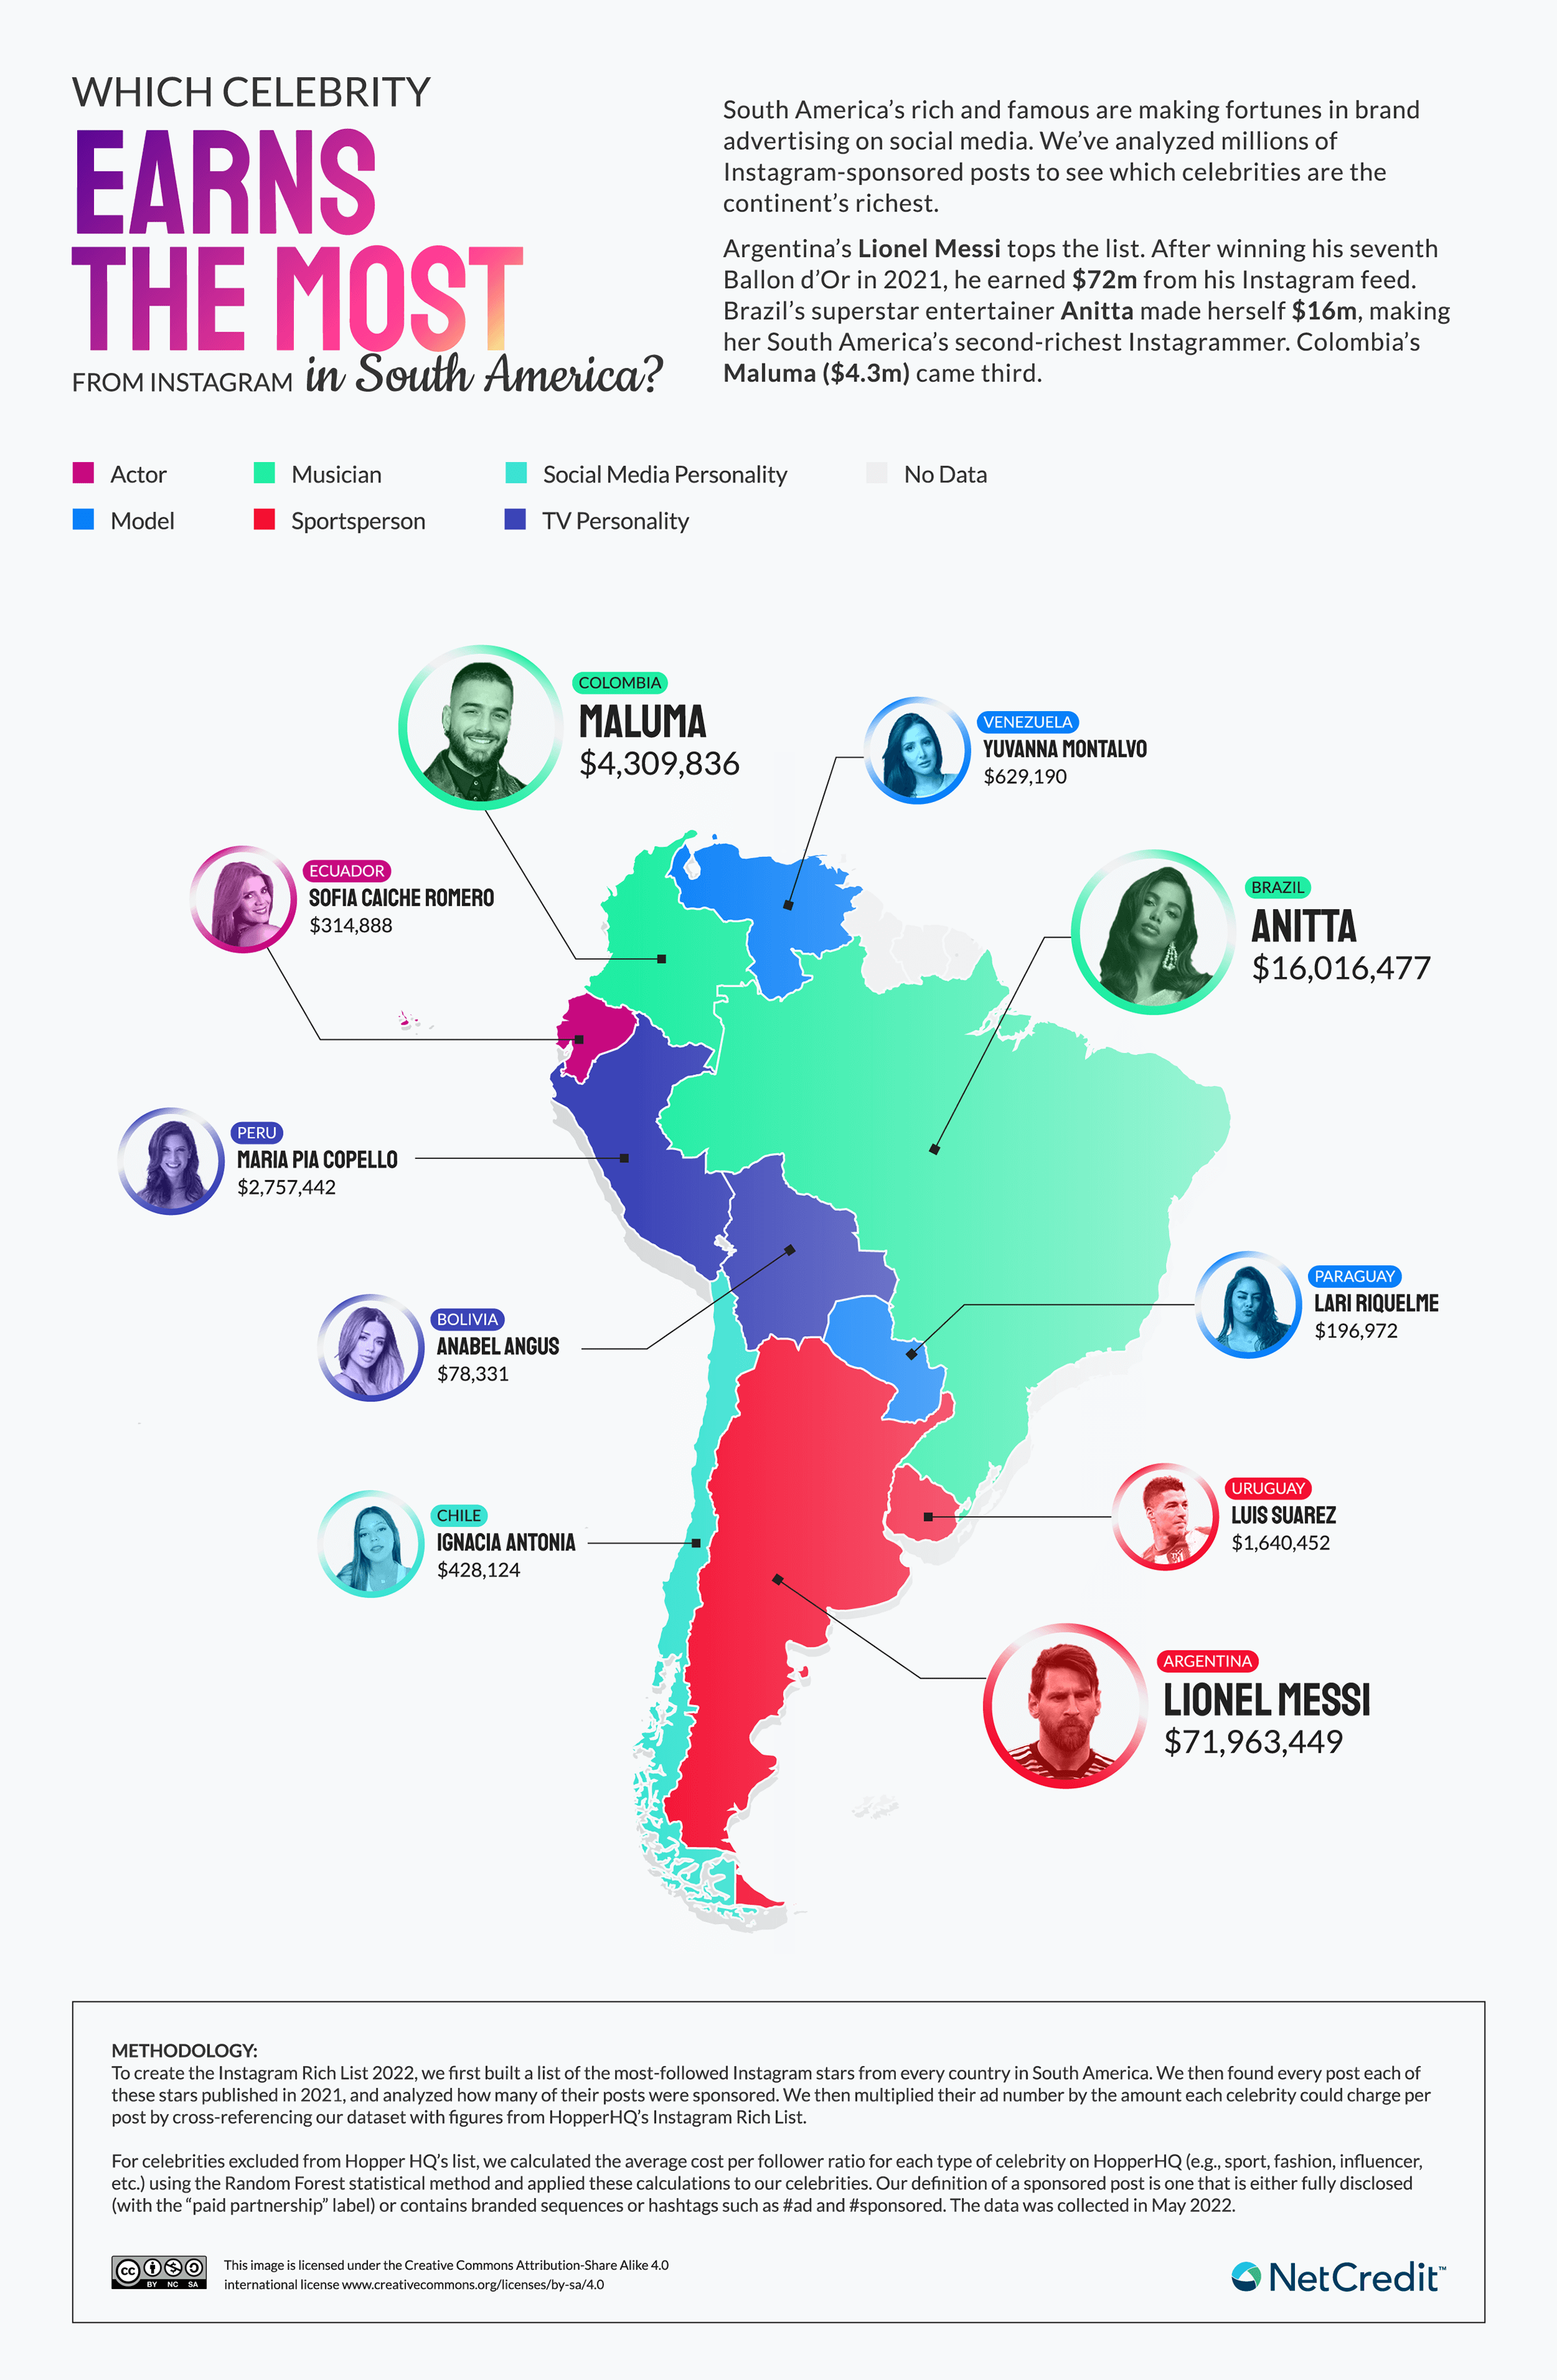 Map of South America with top-earning Instagram celebrities